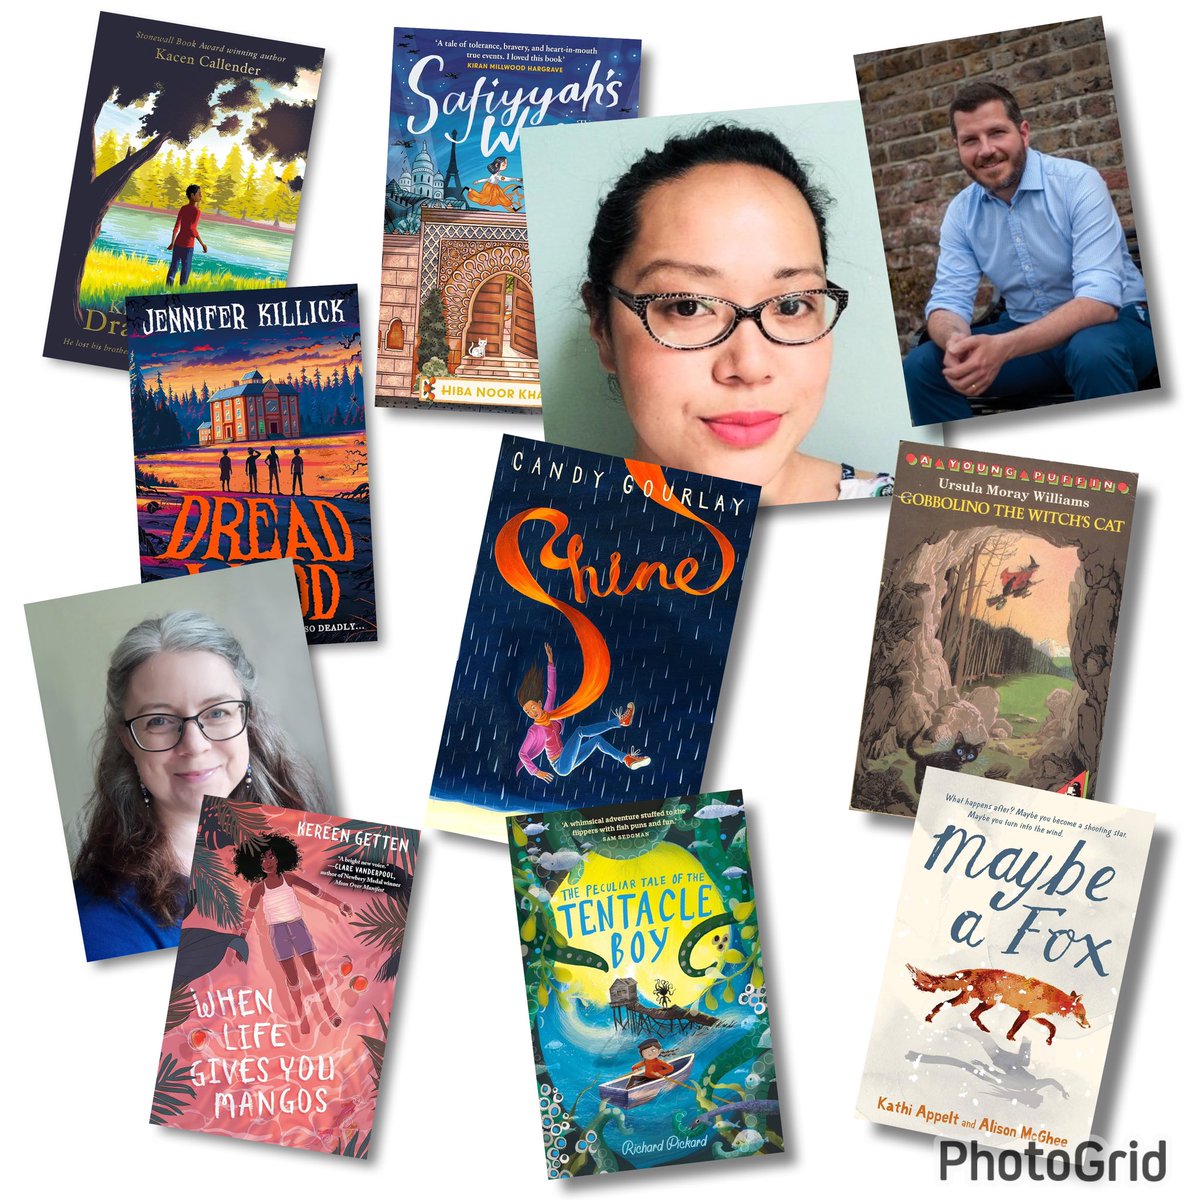 One of the main characters in THE BOY WHO CRIED GHOST absolutely LOVES reading, so I thought it would be a great opportunity to mention books and authors I love! Here’s the books and authors that Amelia reads during her spooky adventure that are all referenced! Check them out!